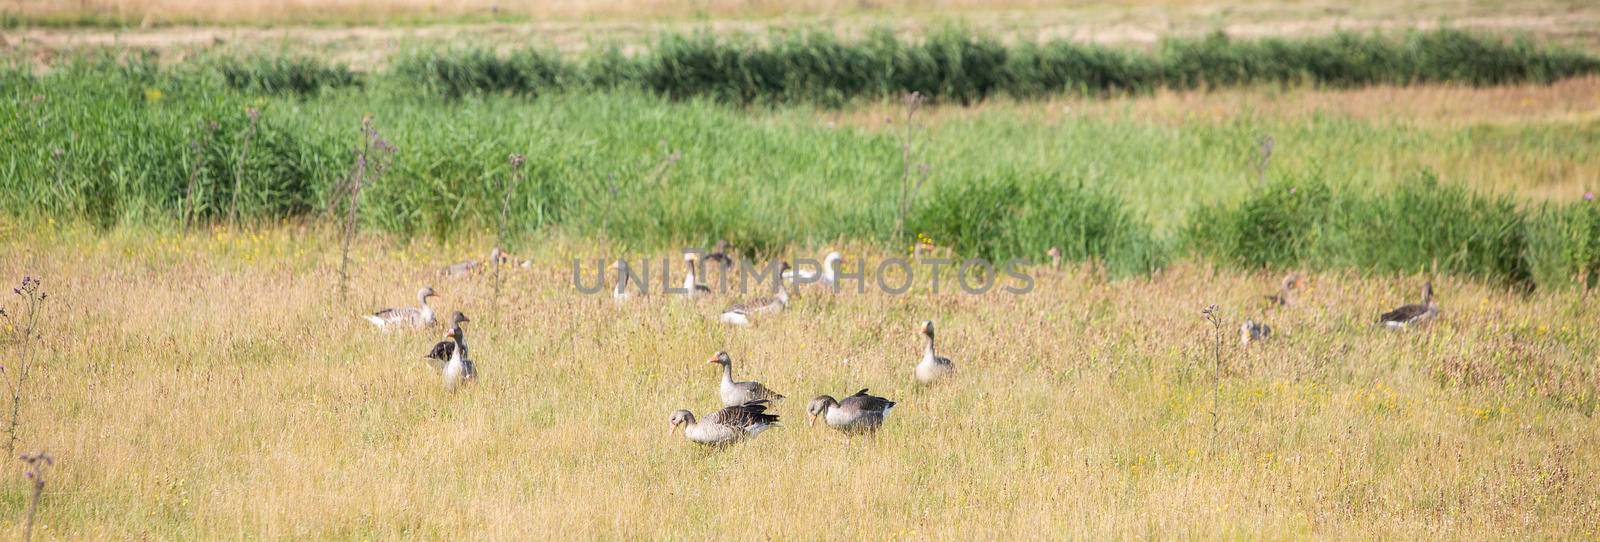 grey geese in summer grass are alert on the island of texel in the netherlands